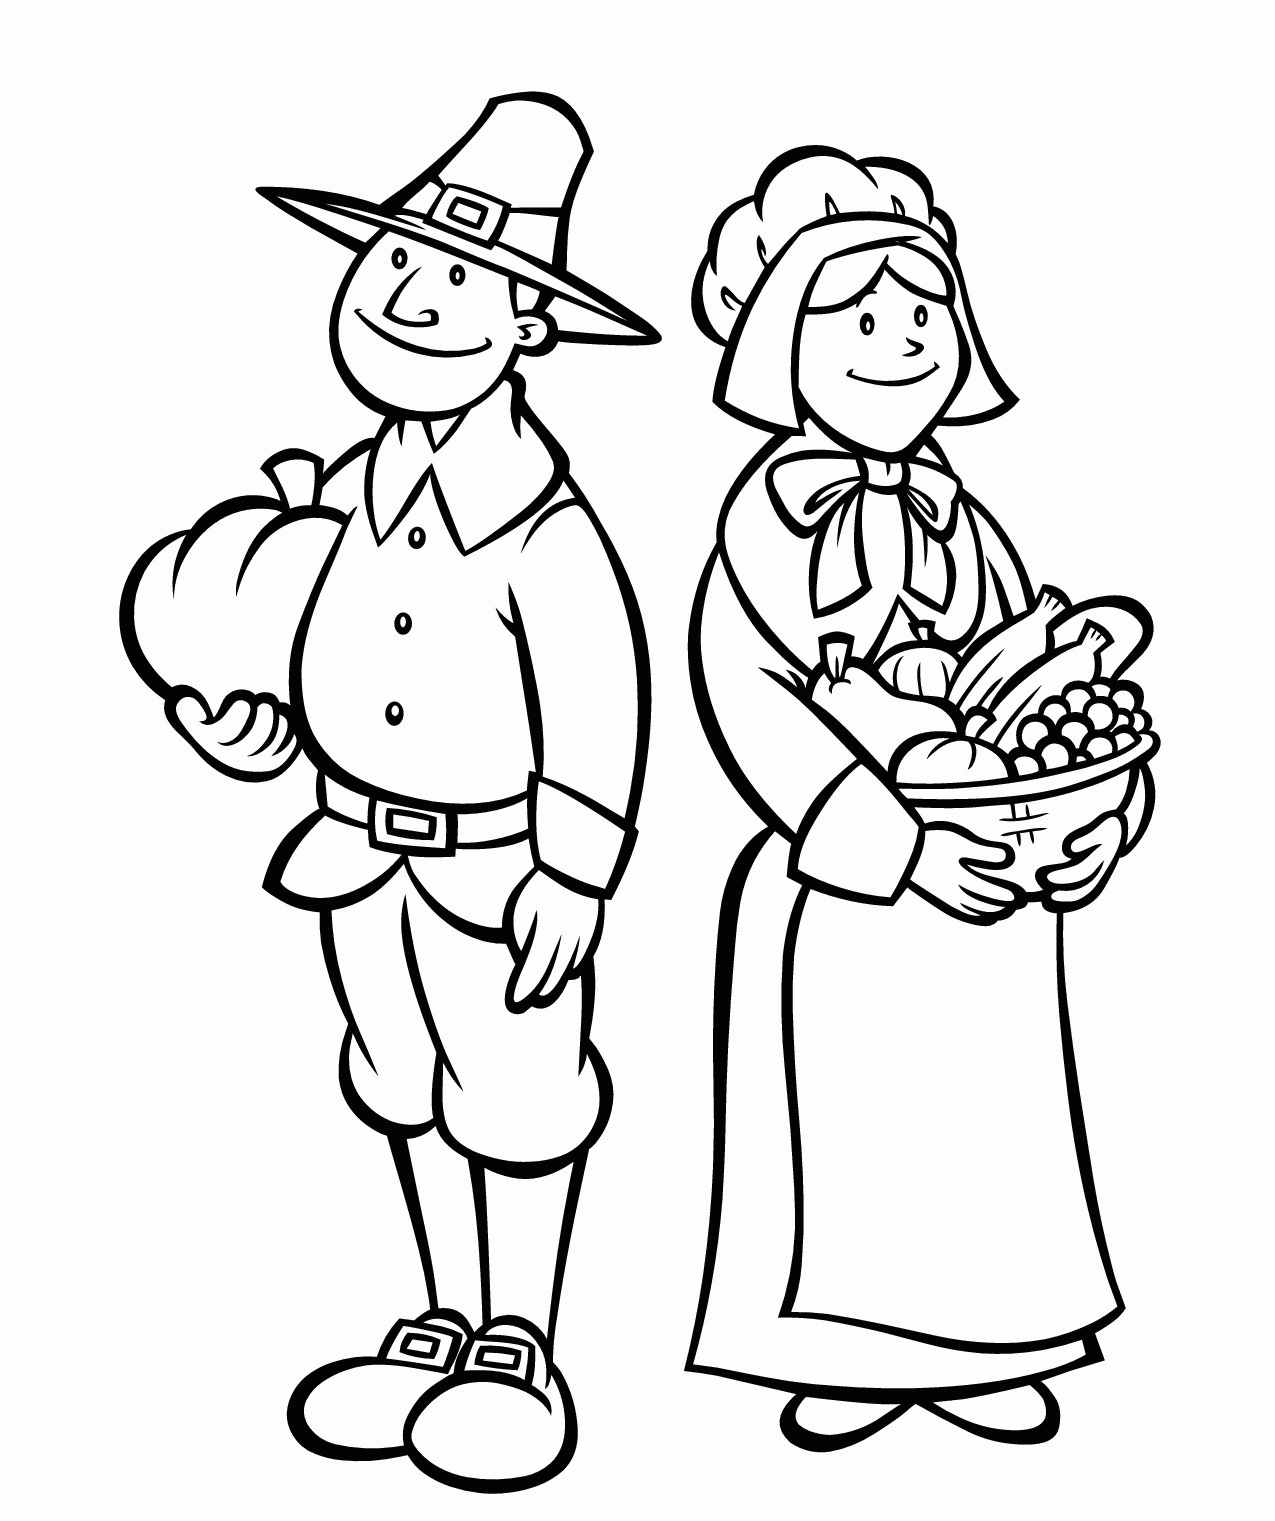 Thanksgiving Coloring Pages Pilgrims Sharing With Indian ...